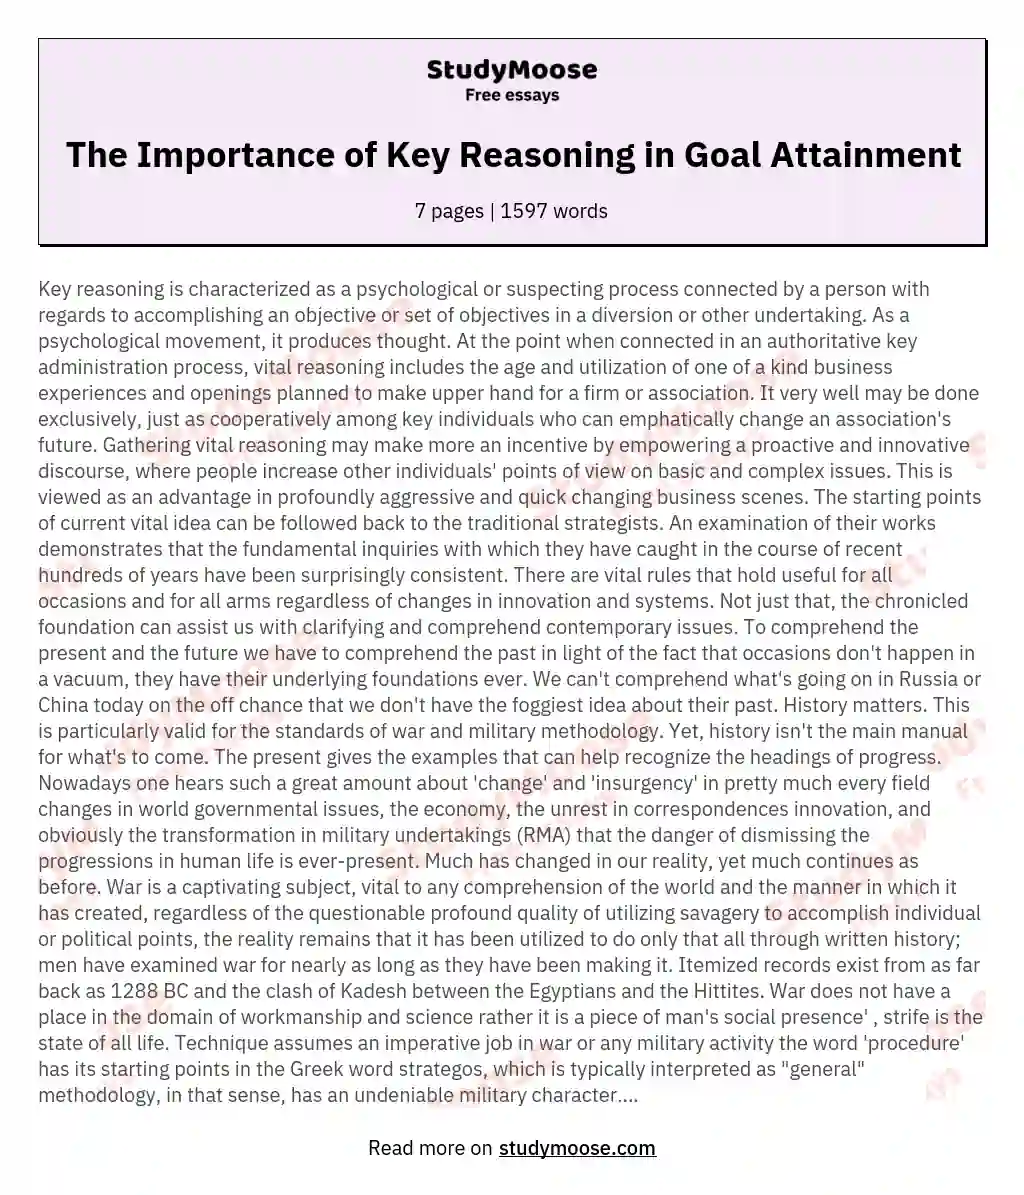 The Importance of Key Reasoning in Goal Attainment essay